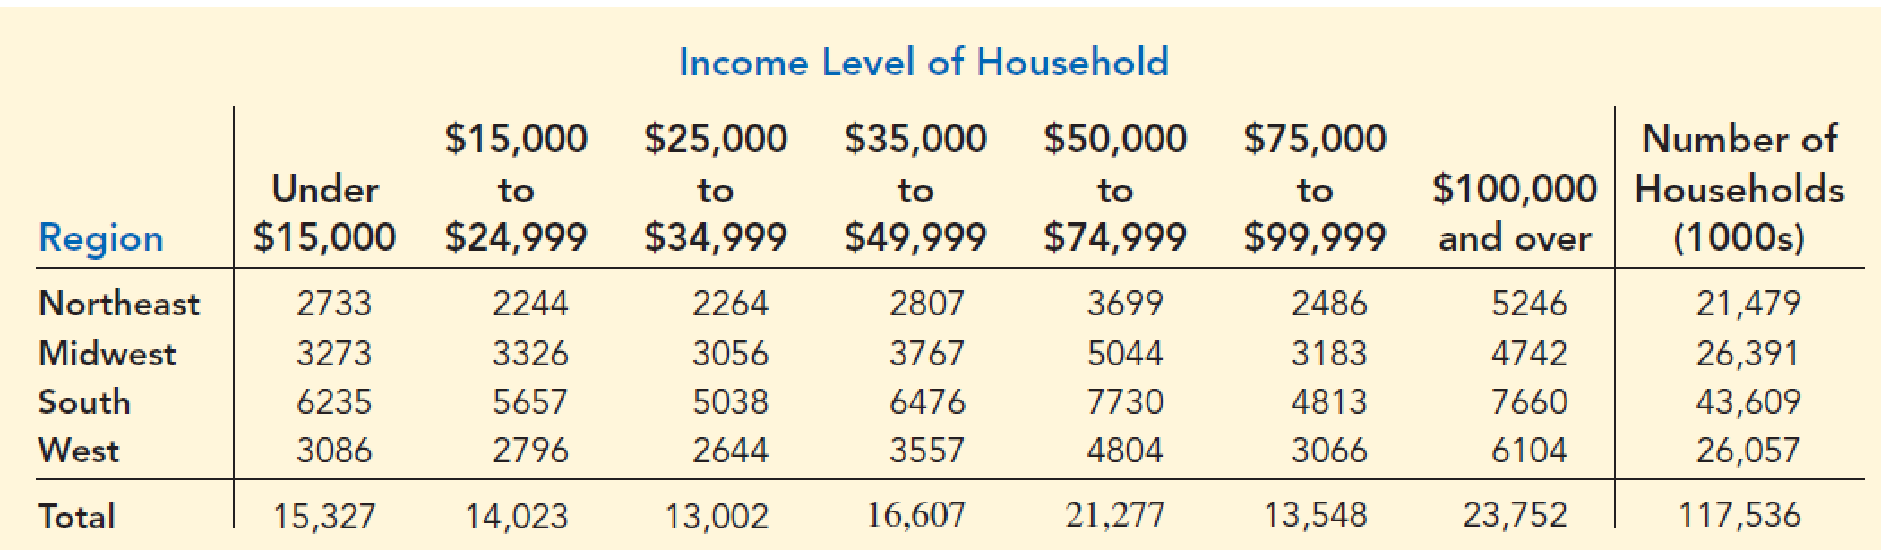 Chapter 2.3, Problem 32E, Household Income Levels. The following crosstabulation shows the number of households (1000s) in 